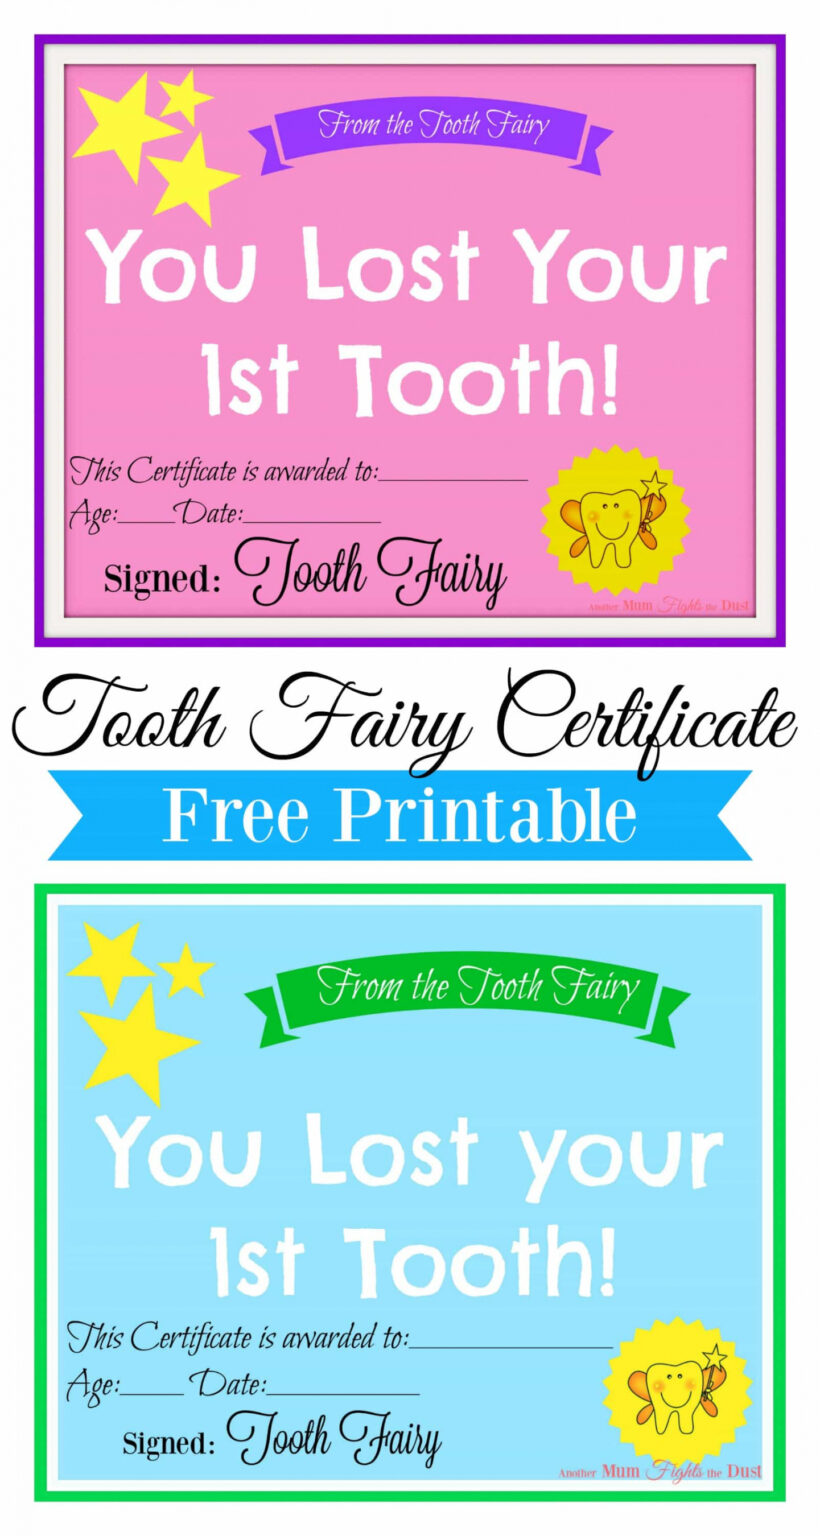 tooth-fairy-certificate-girl-free-printable-free-printable-hq